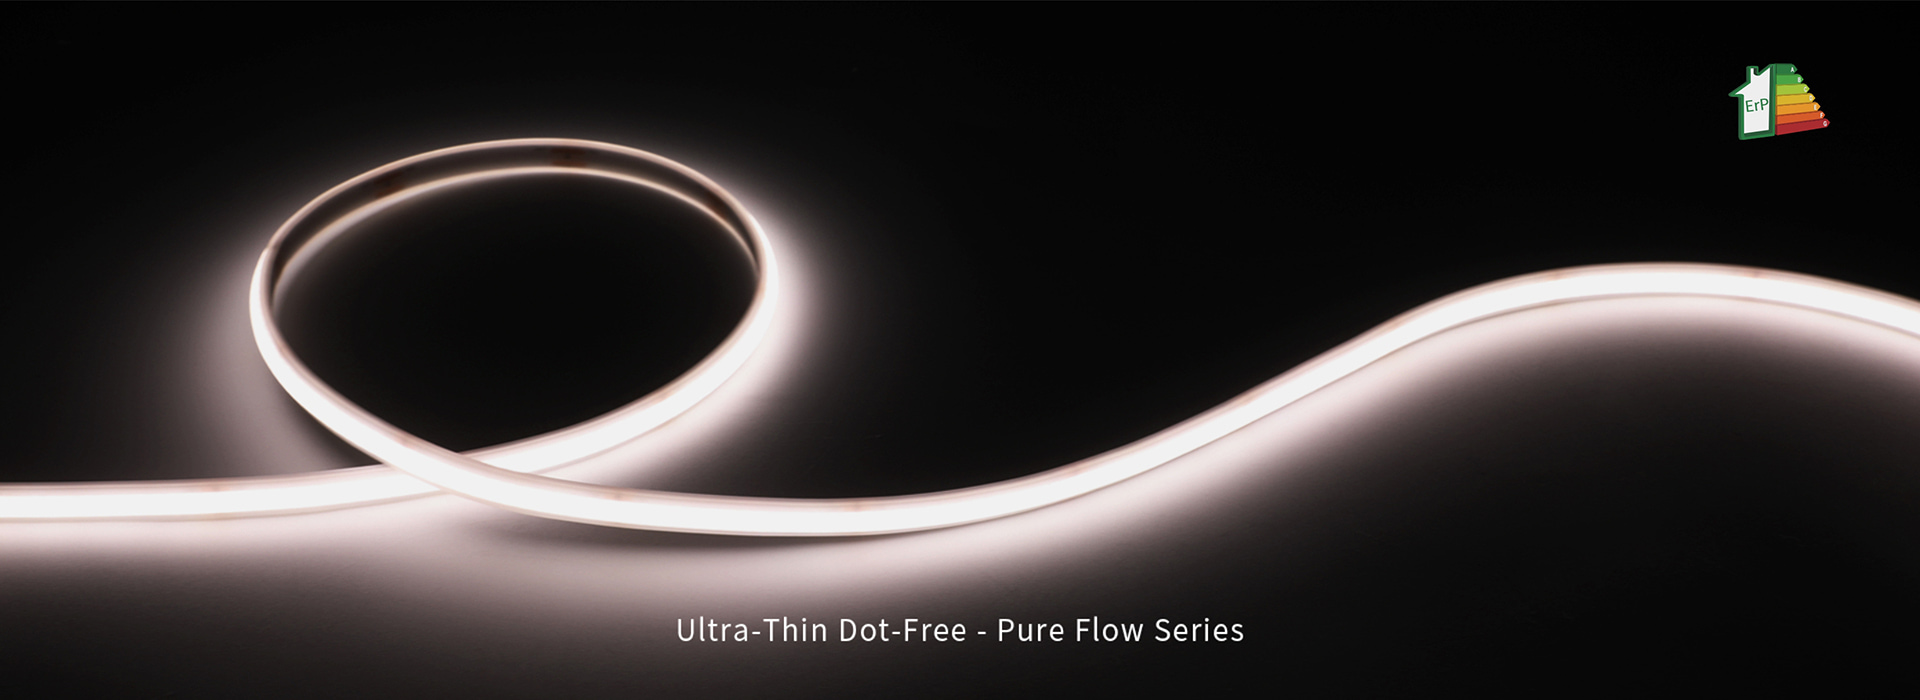 Ultra-Thin Dot-Free - Pure Flow Series